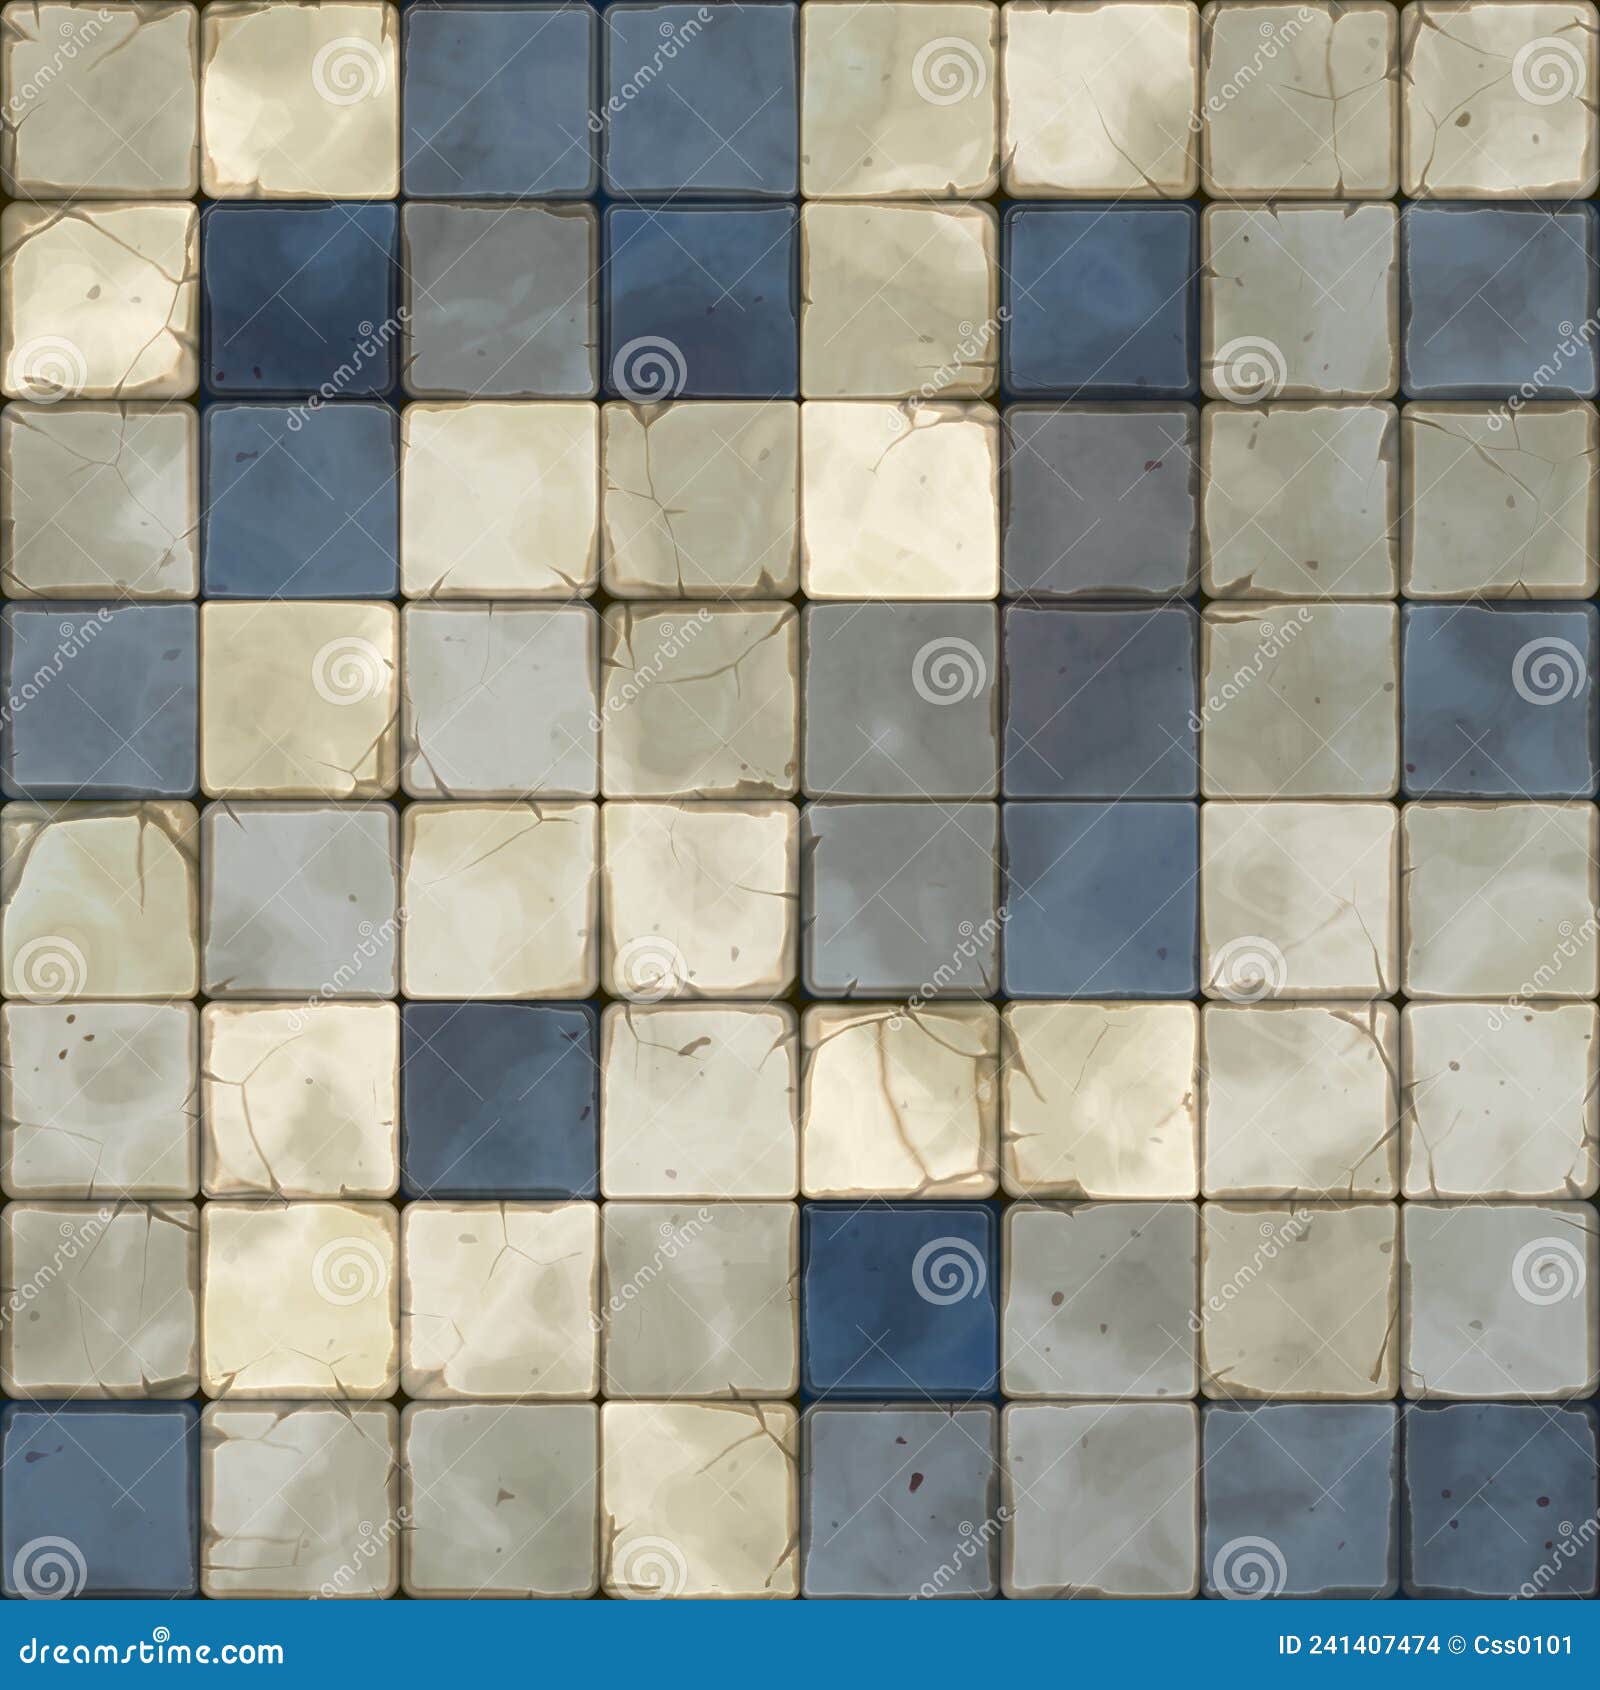 Cartoon Cracked Floor Tiles. Ground Wall Tiles Background, Ancient Old ...